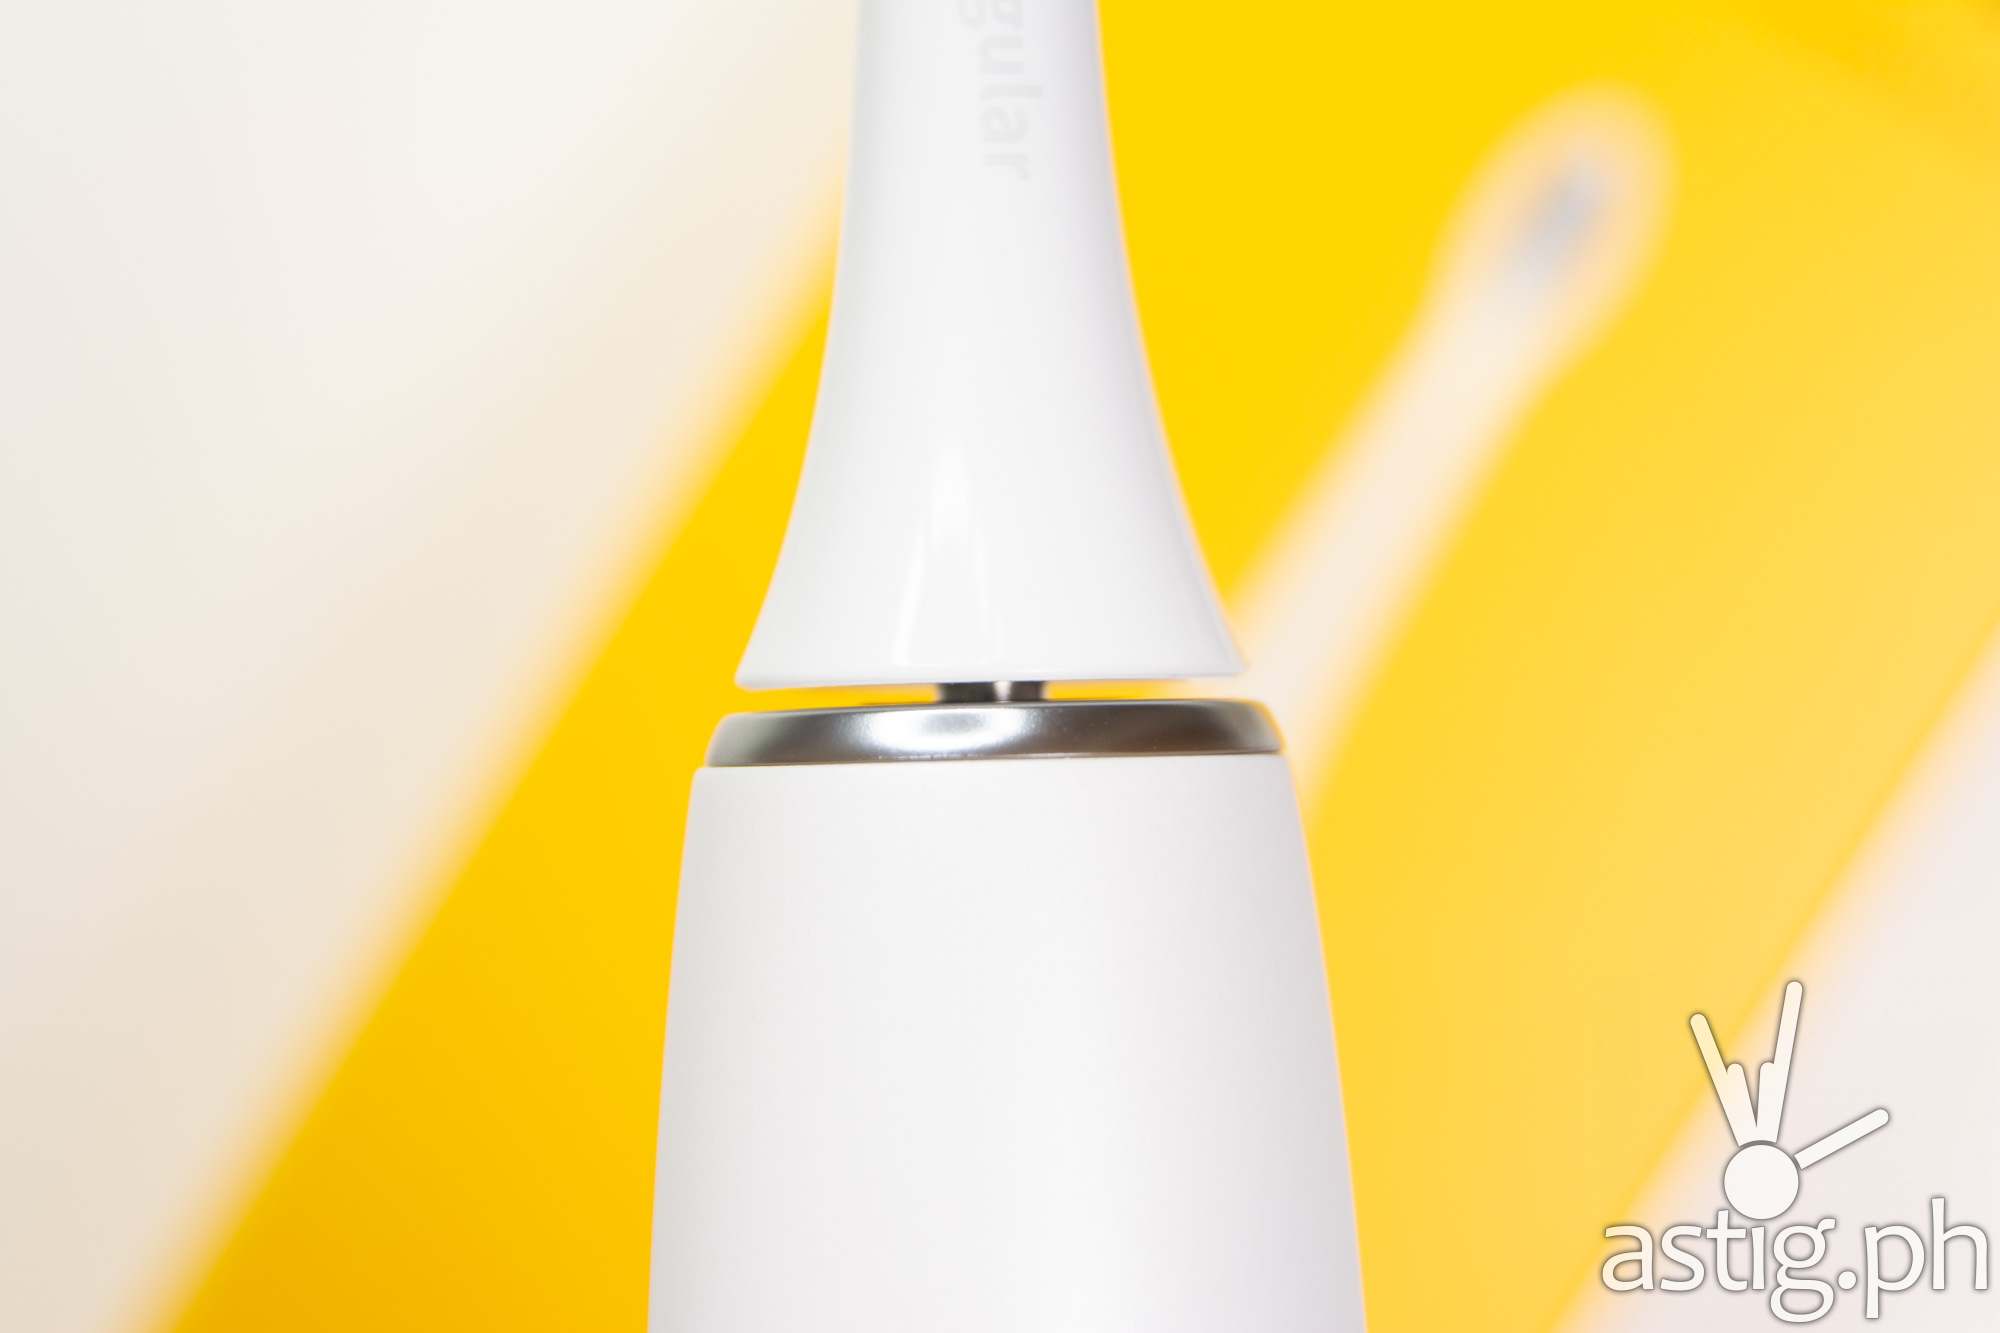 Gap closeup - realme M1 Sonic Electric Toothbrush (Philippines)